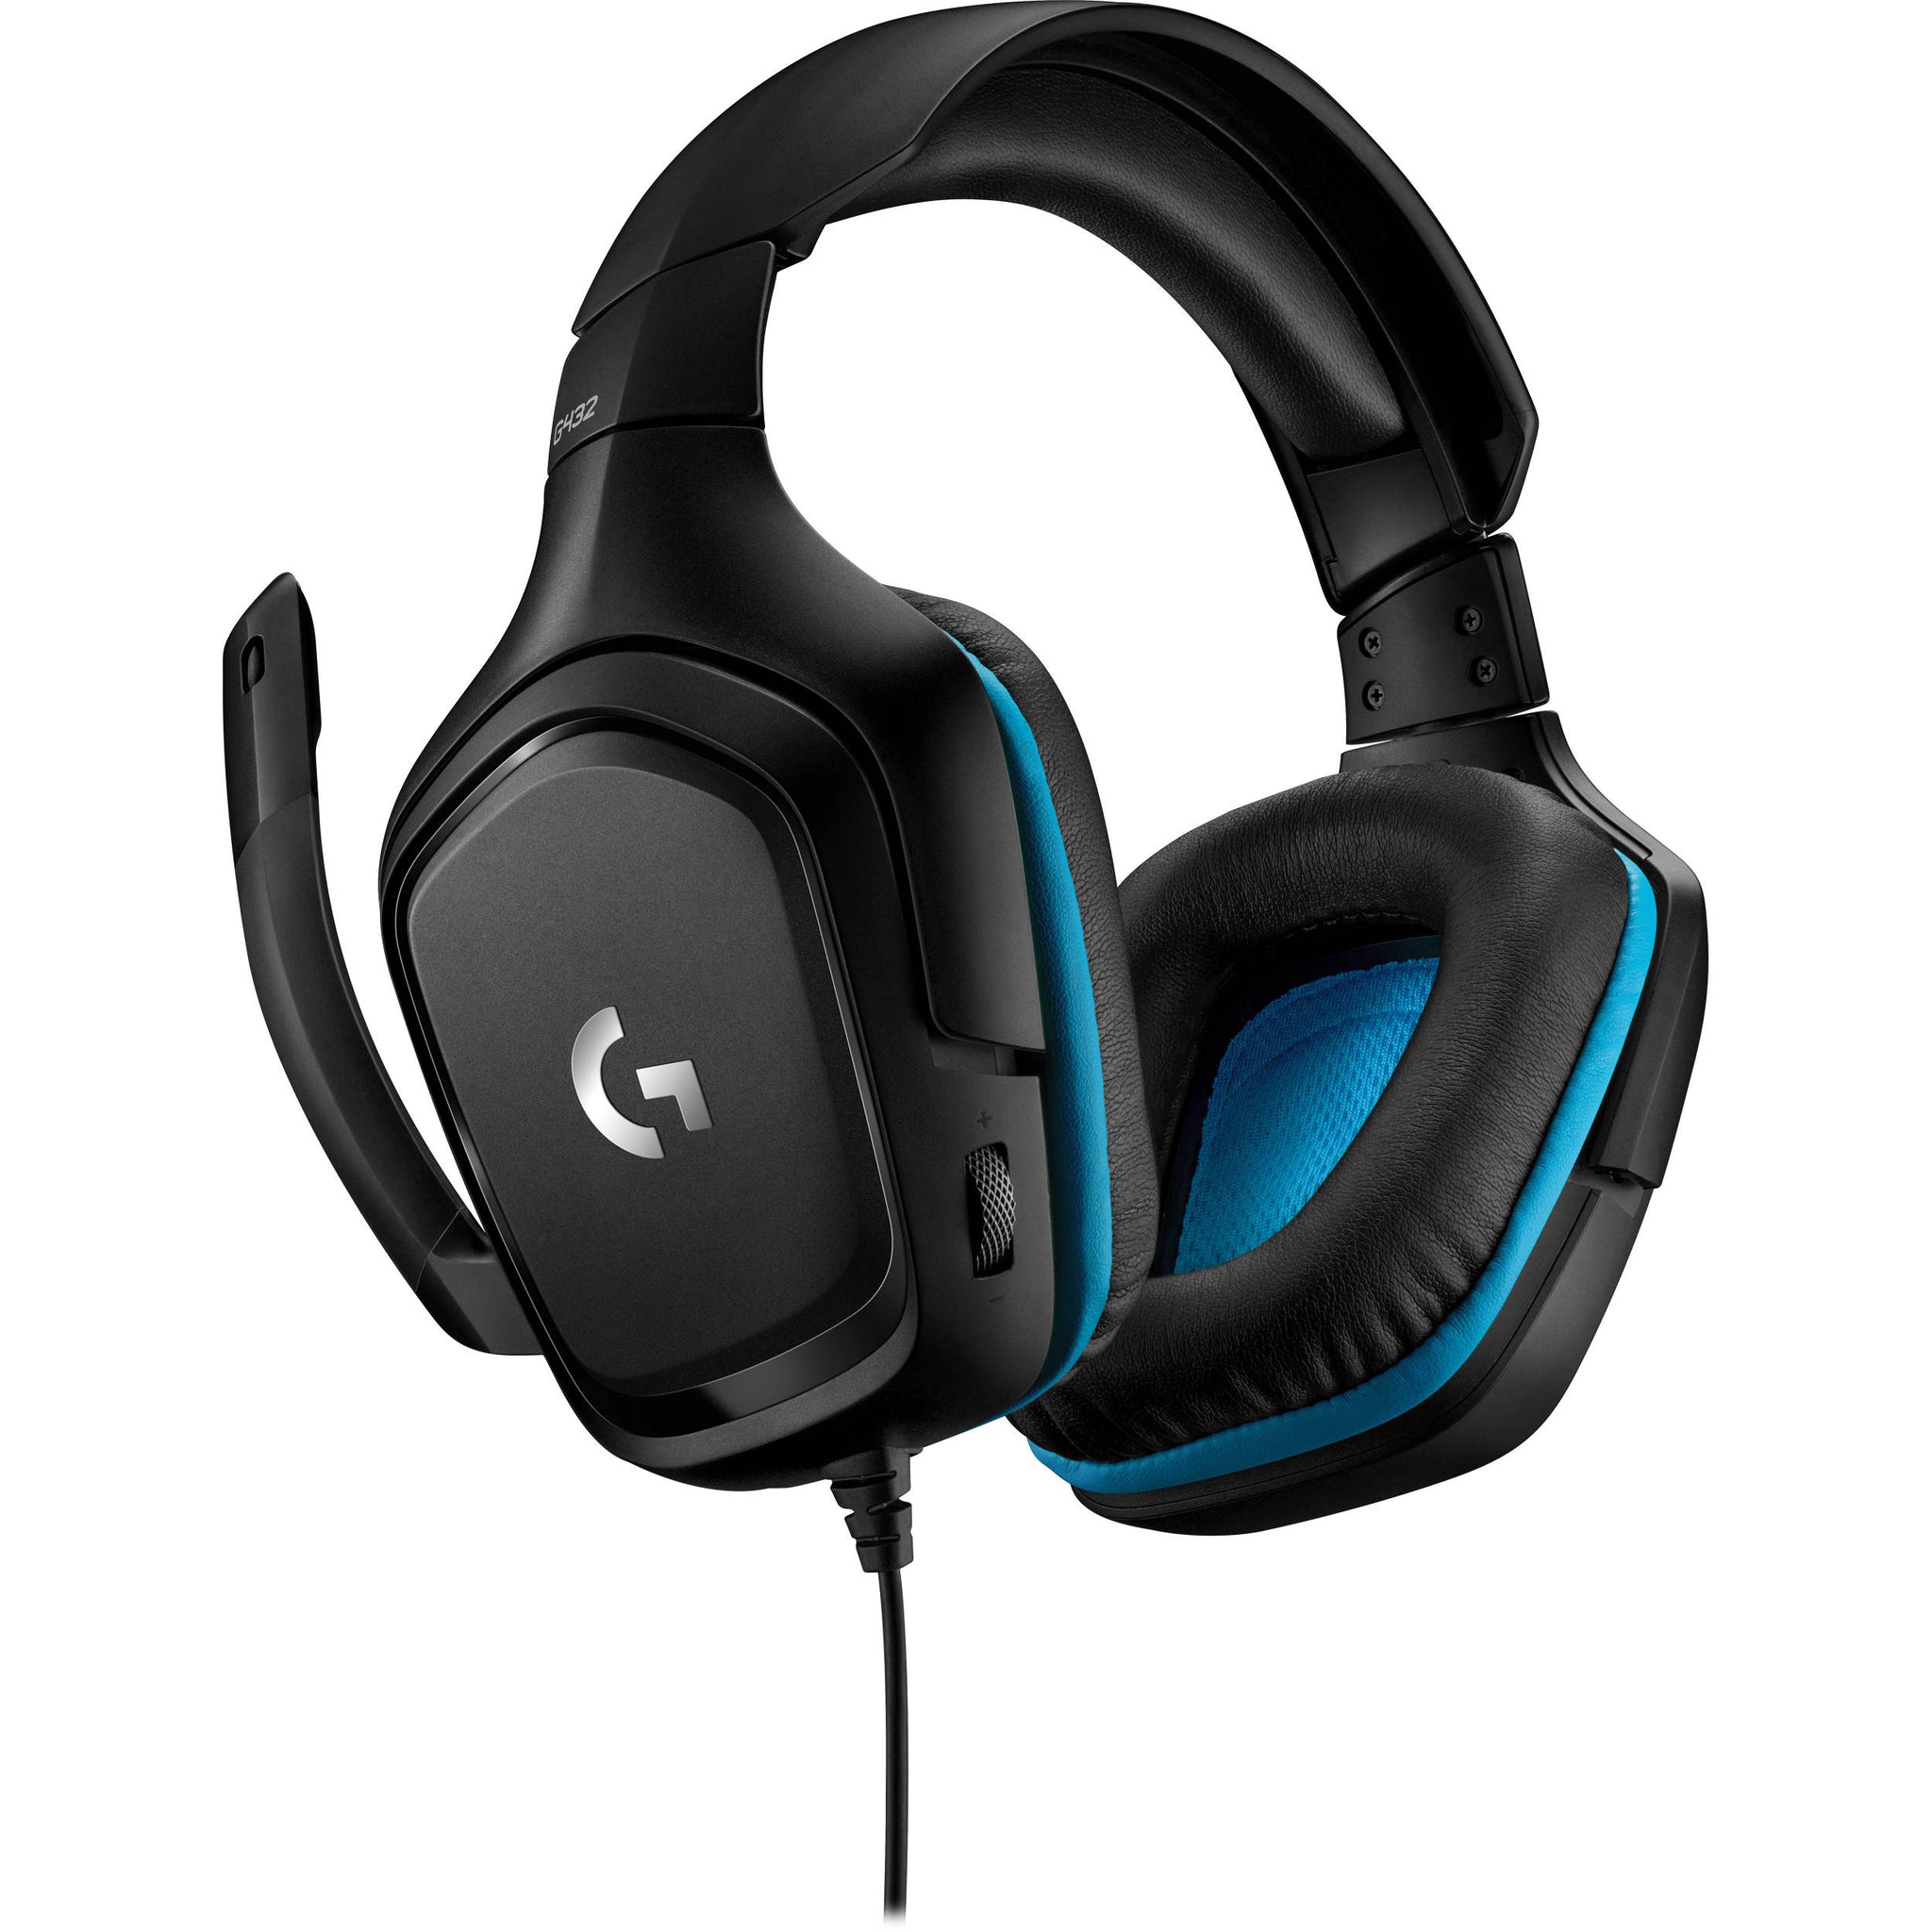 Official Logitech - G432 Wired 7.1 Surround Sound Gaming Headset for PC - Black/Blue